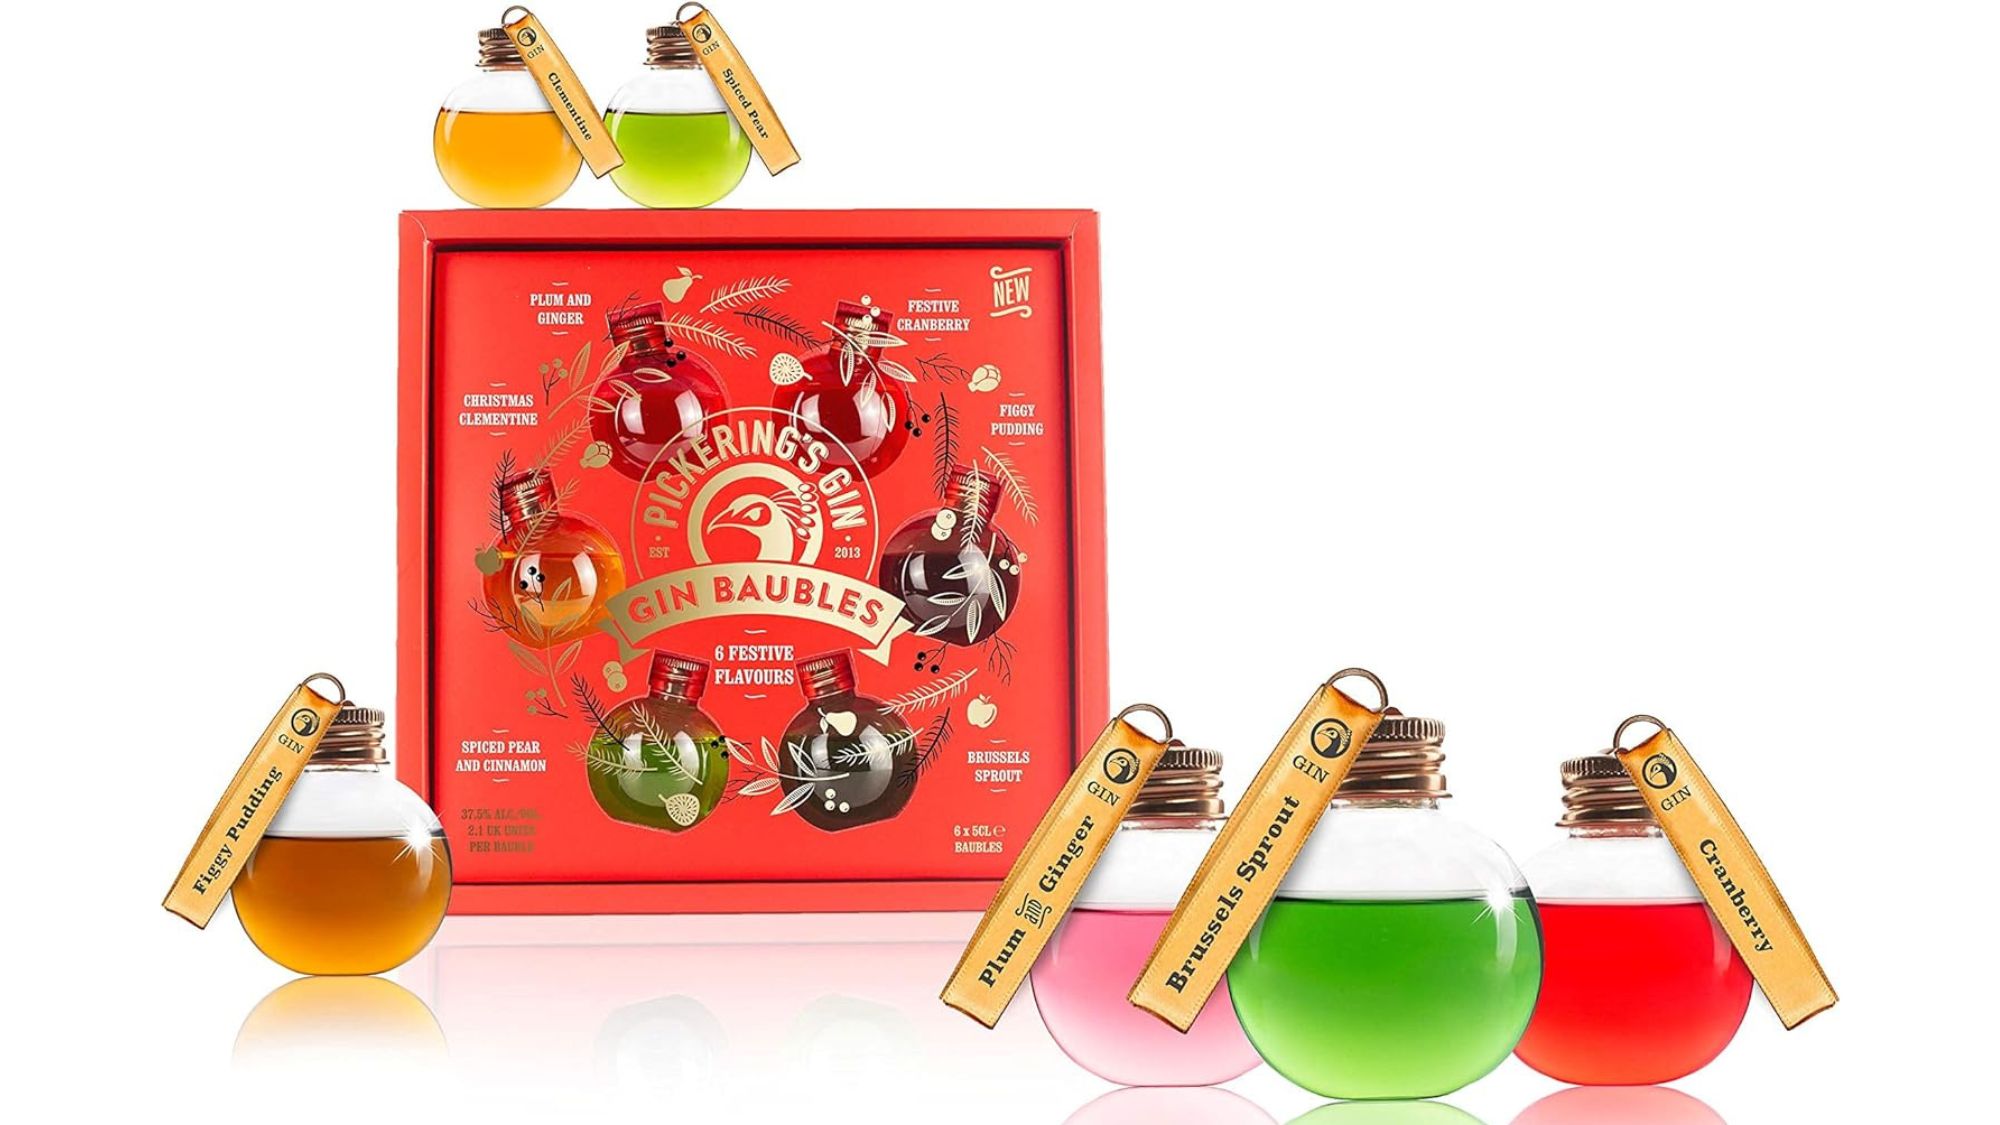 Pickering's Festively Flavoured Gin Baubles